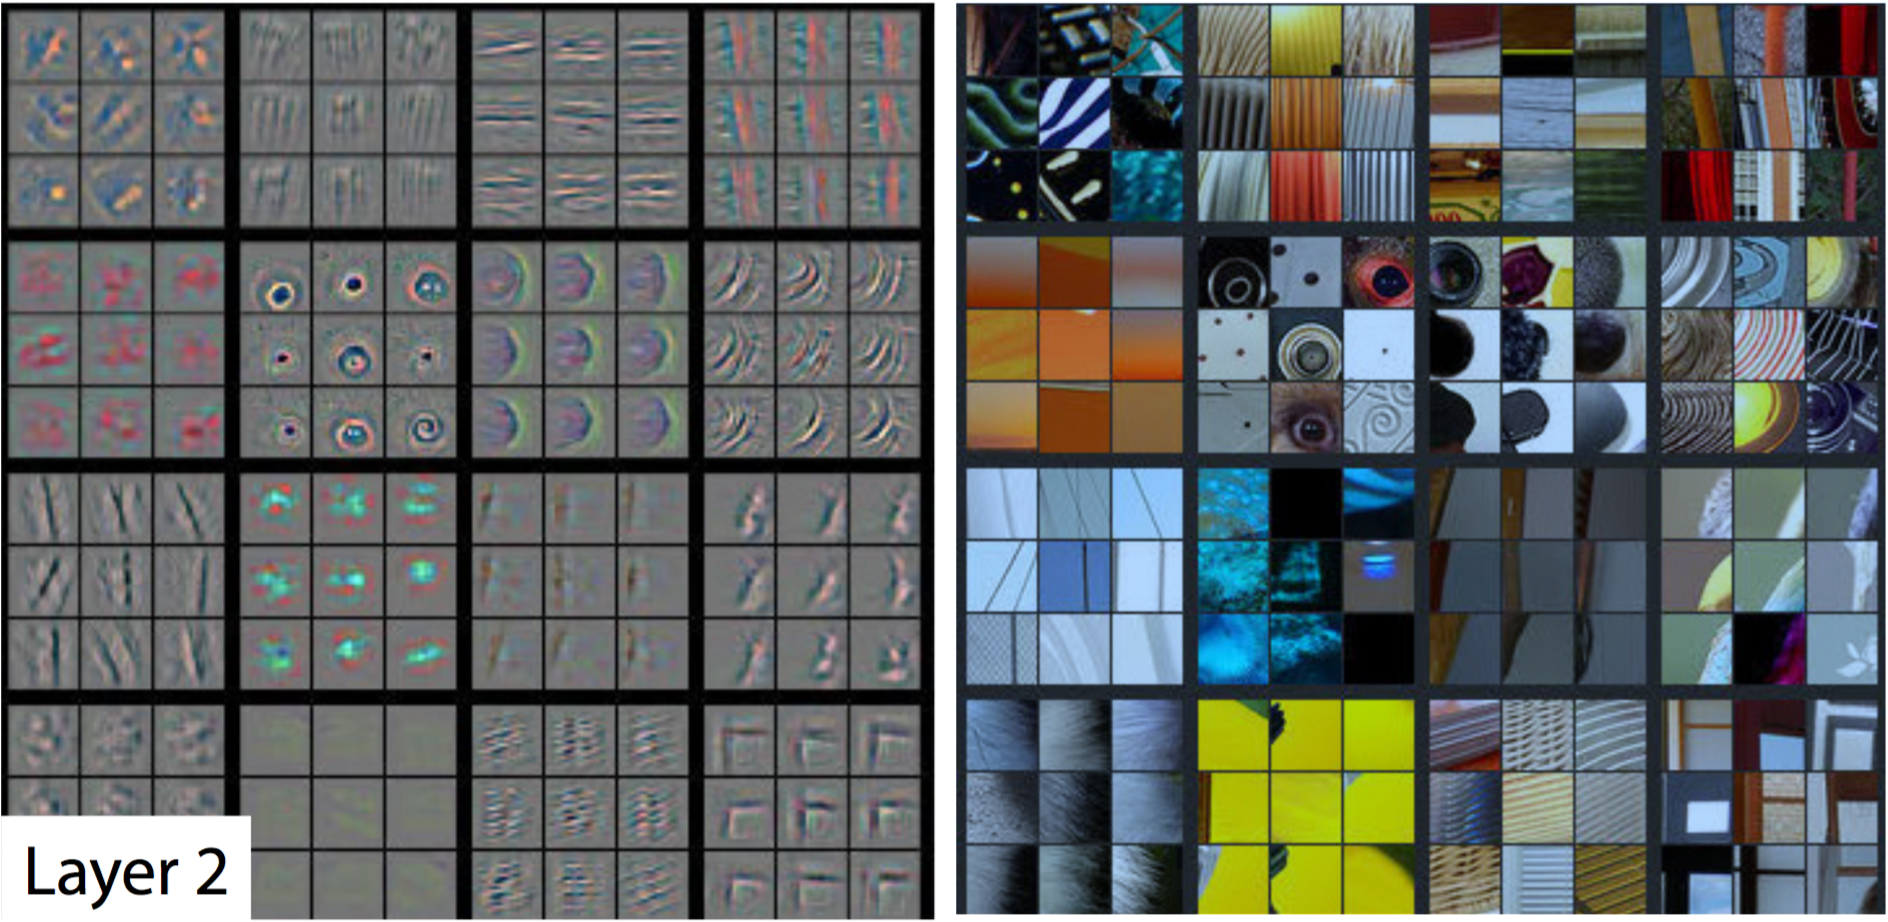 A visualization of the second layer in the CNN. Notice how we are picking up more complex ideas like circles and stripes. The gray grid on the left represents how this layer of the CNN activates (or "what it sees") based on the corresponding images from the grid on the right.